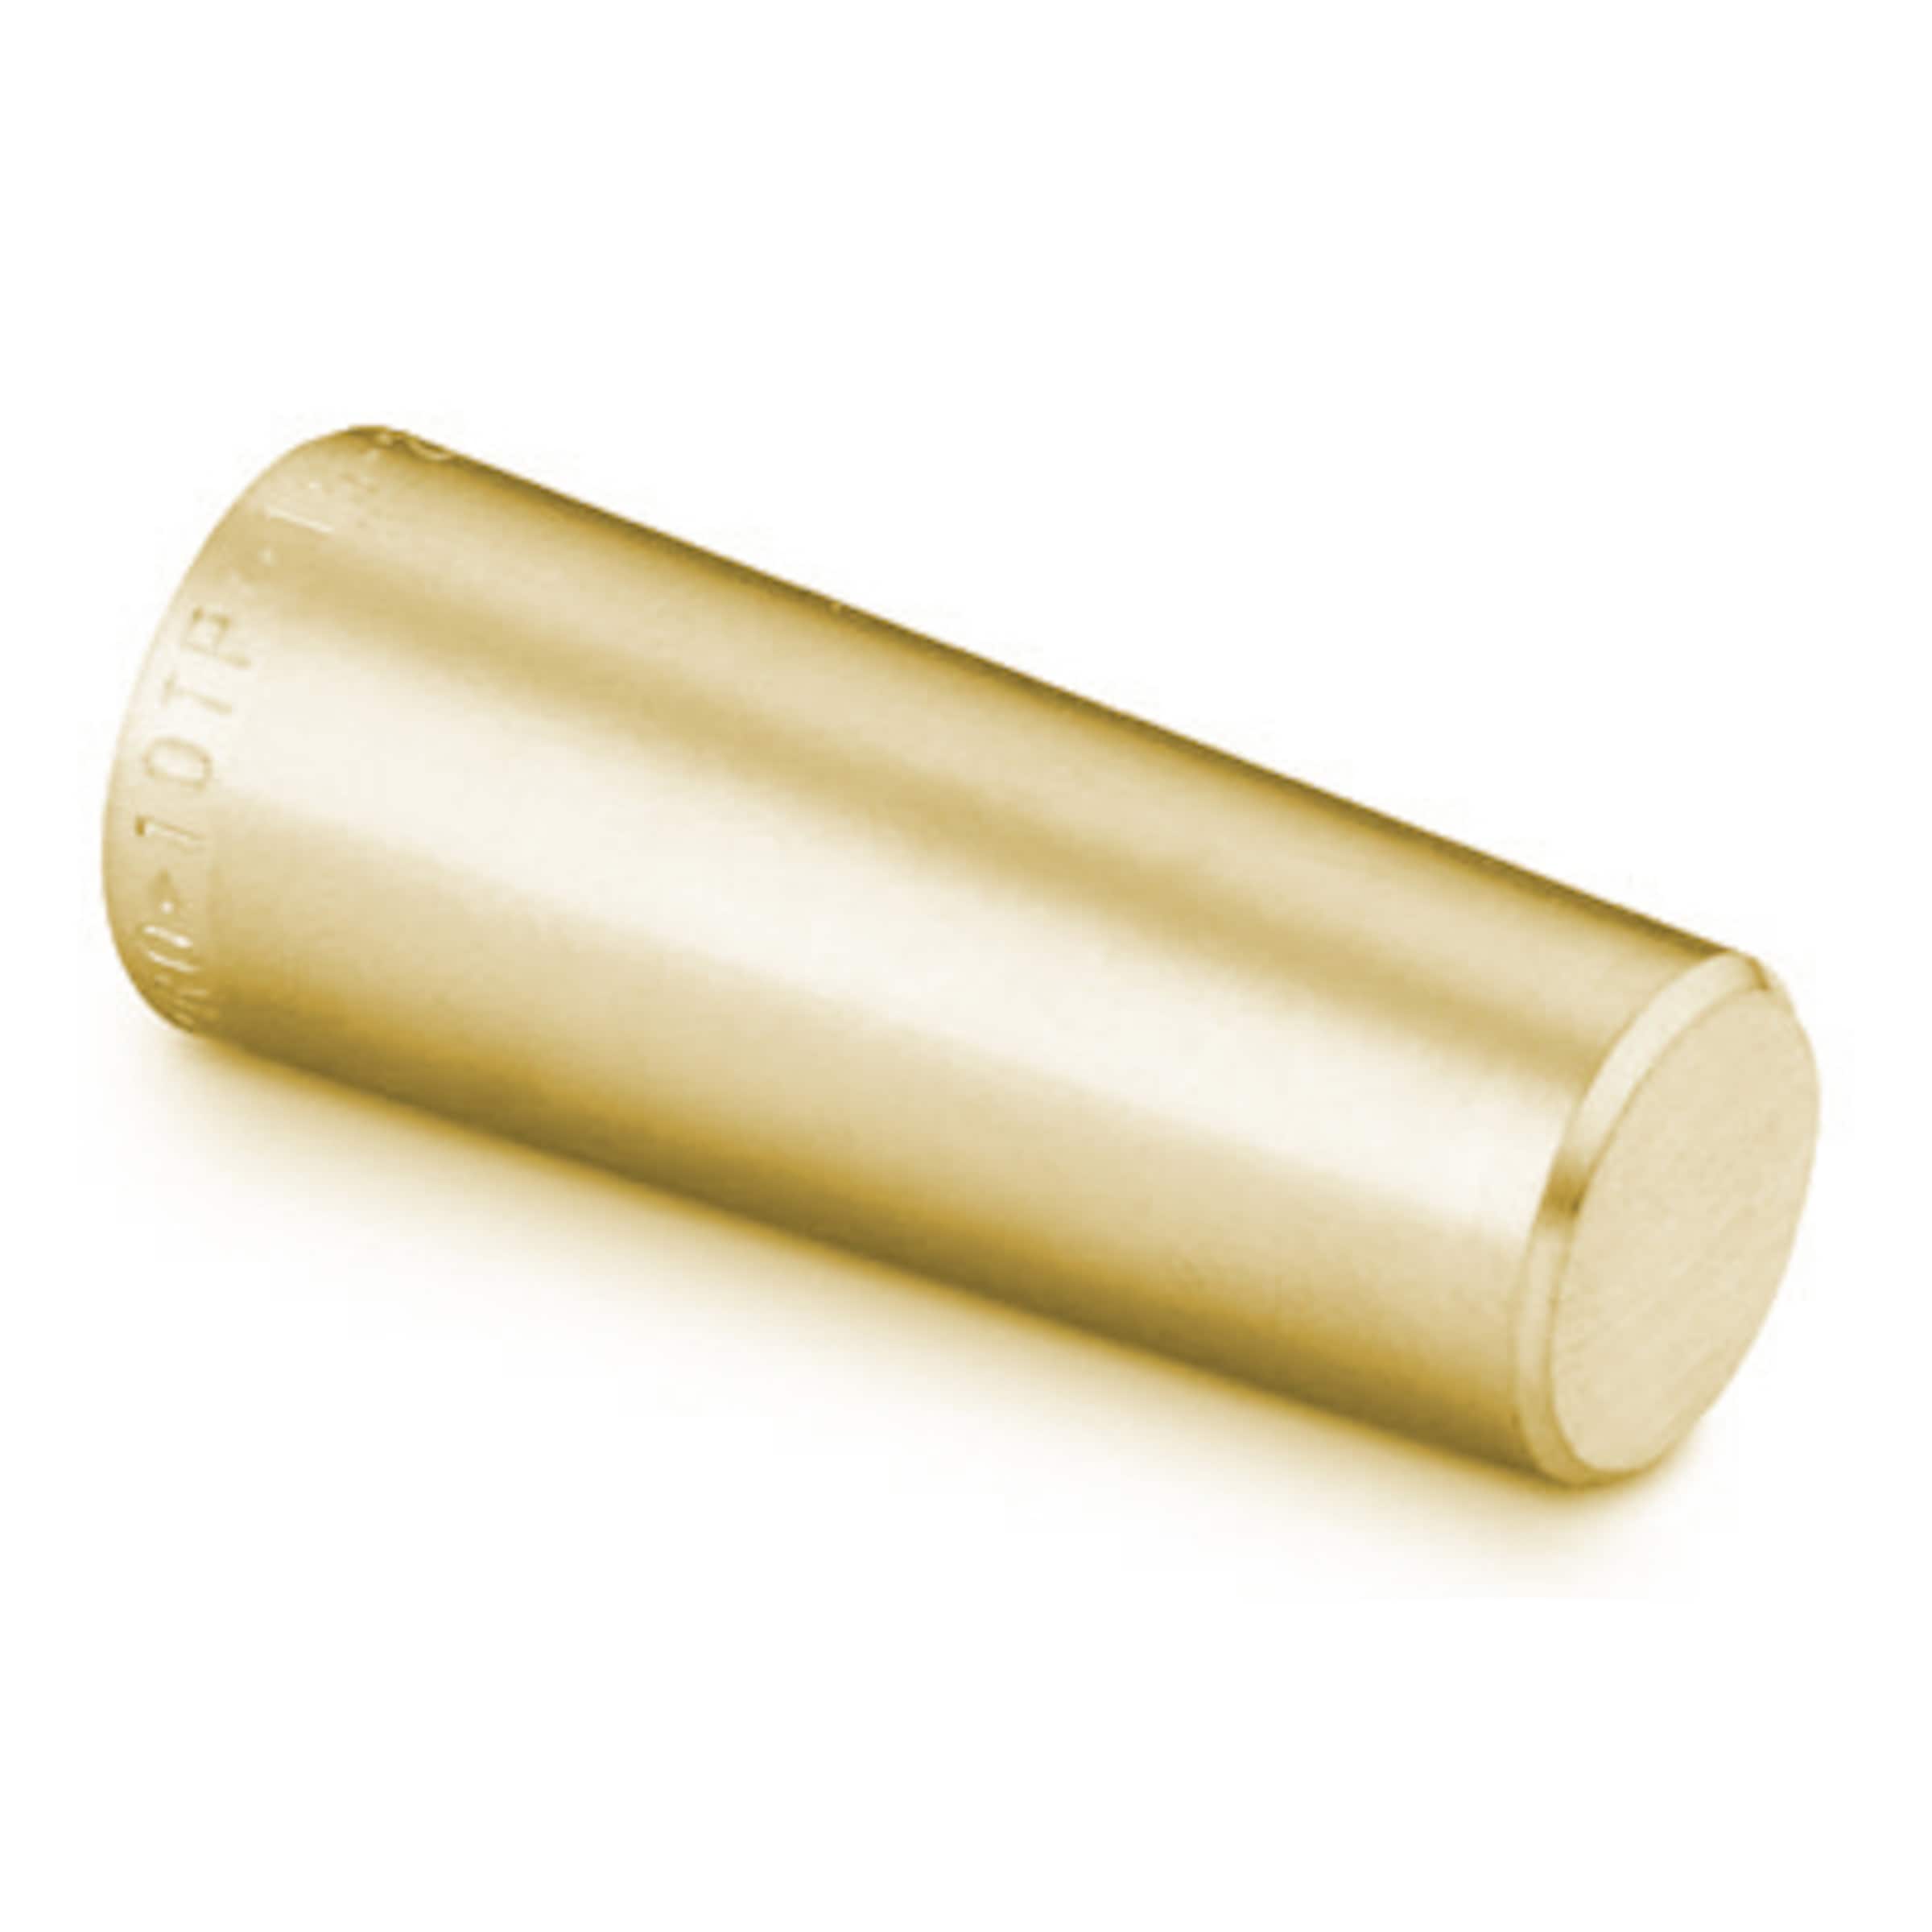 Brass Heat Exchanger Tube Plug, 3/4 in. OD, 15 to 20 Tube Wall Gage, Tube  Plugs, Sealants, Leak Detectors, Lubricants, and Sealants, All Products